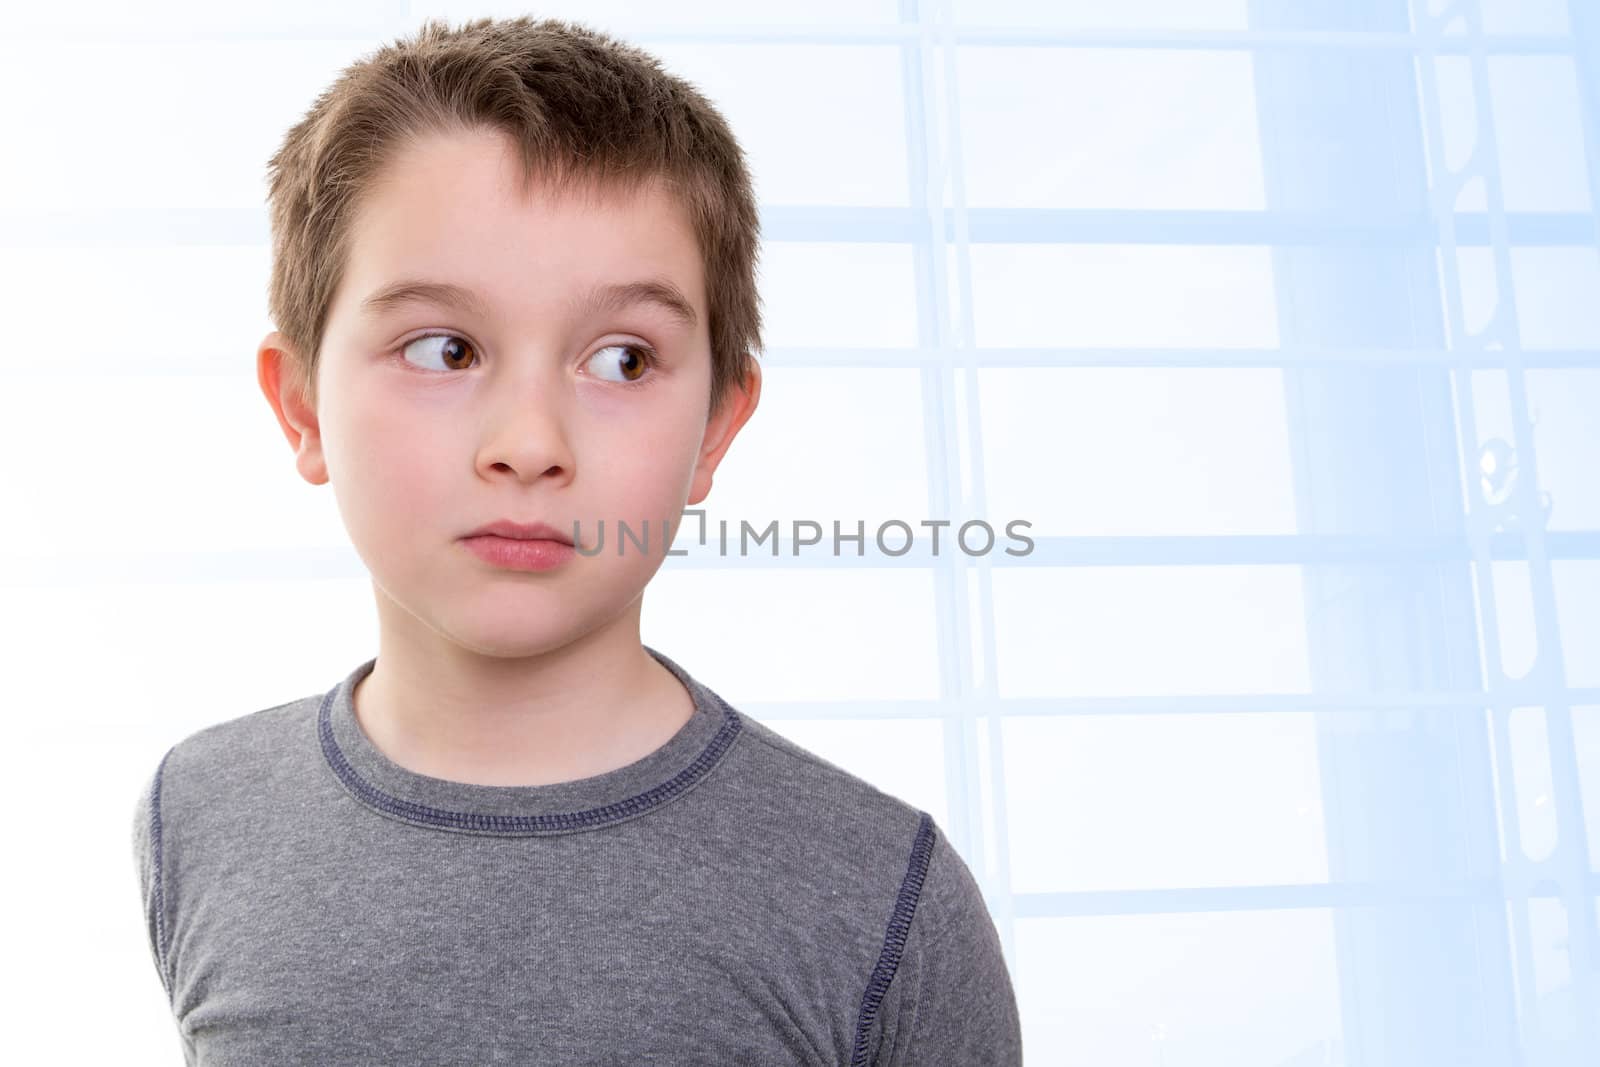 Eight years old kid looking out skeptically accusing with his big eyes